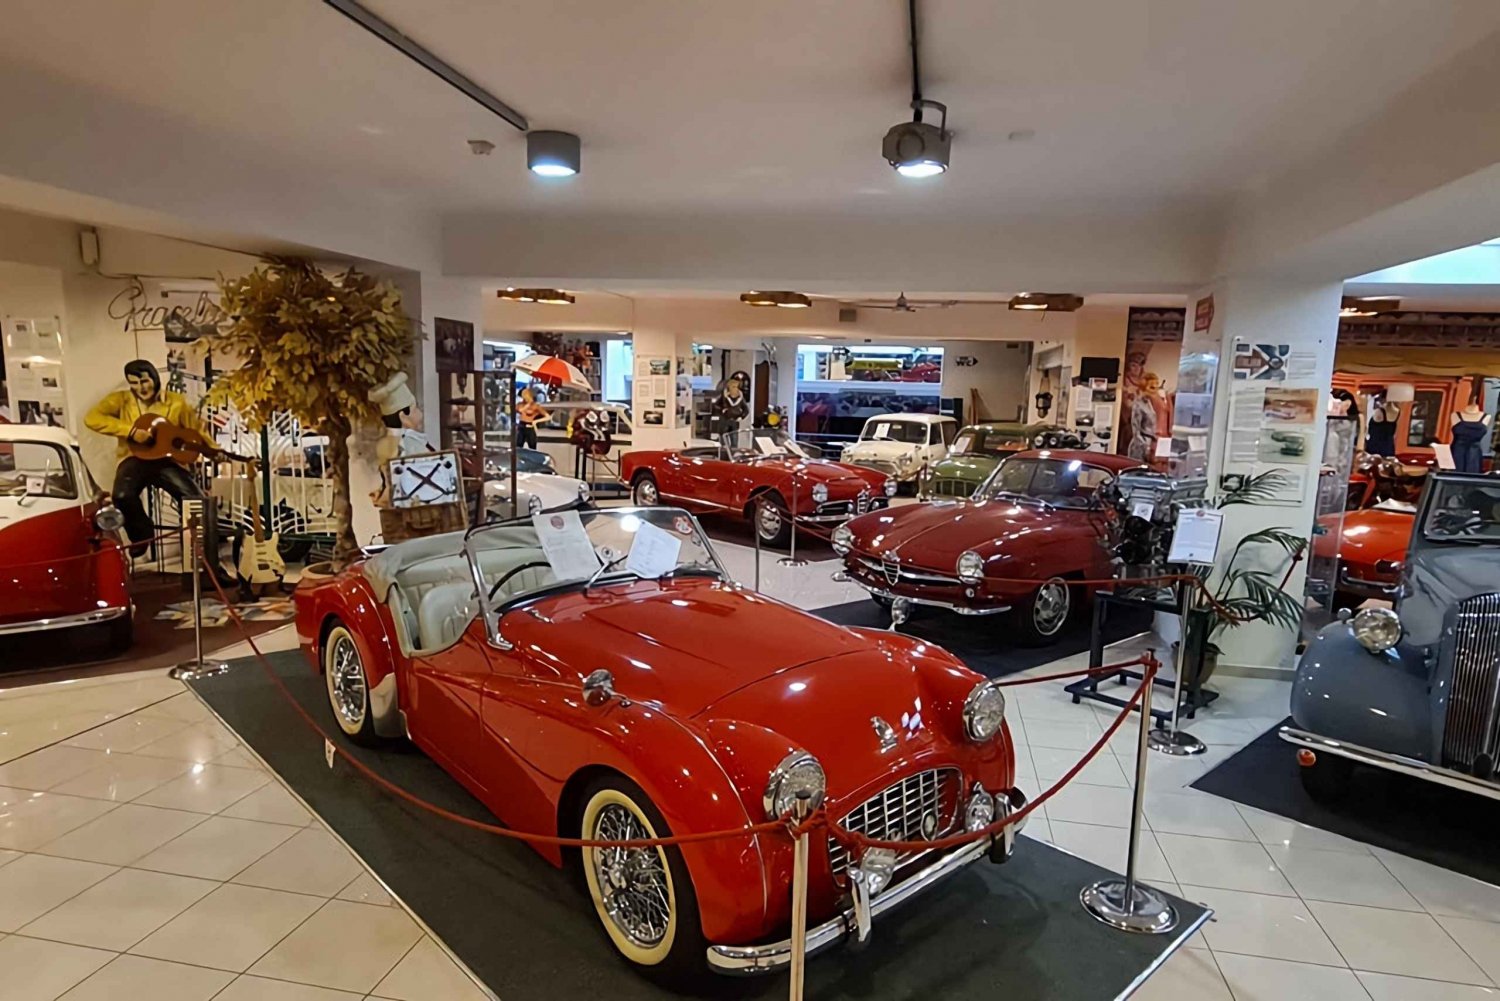 Malta: Classic Car Collection Museum Toegangbewijs